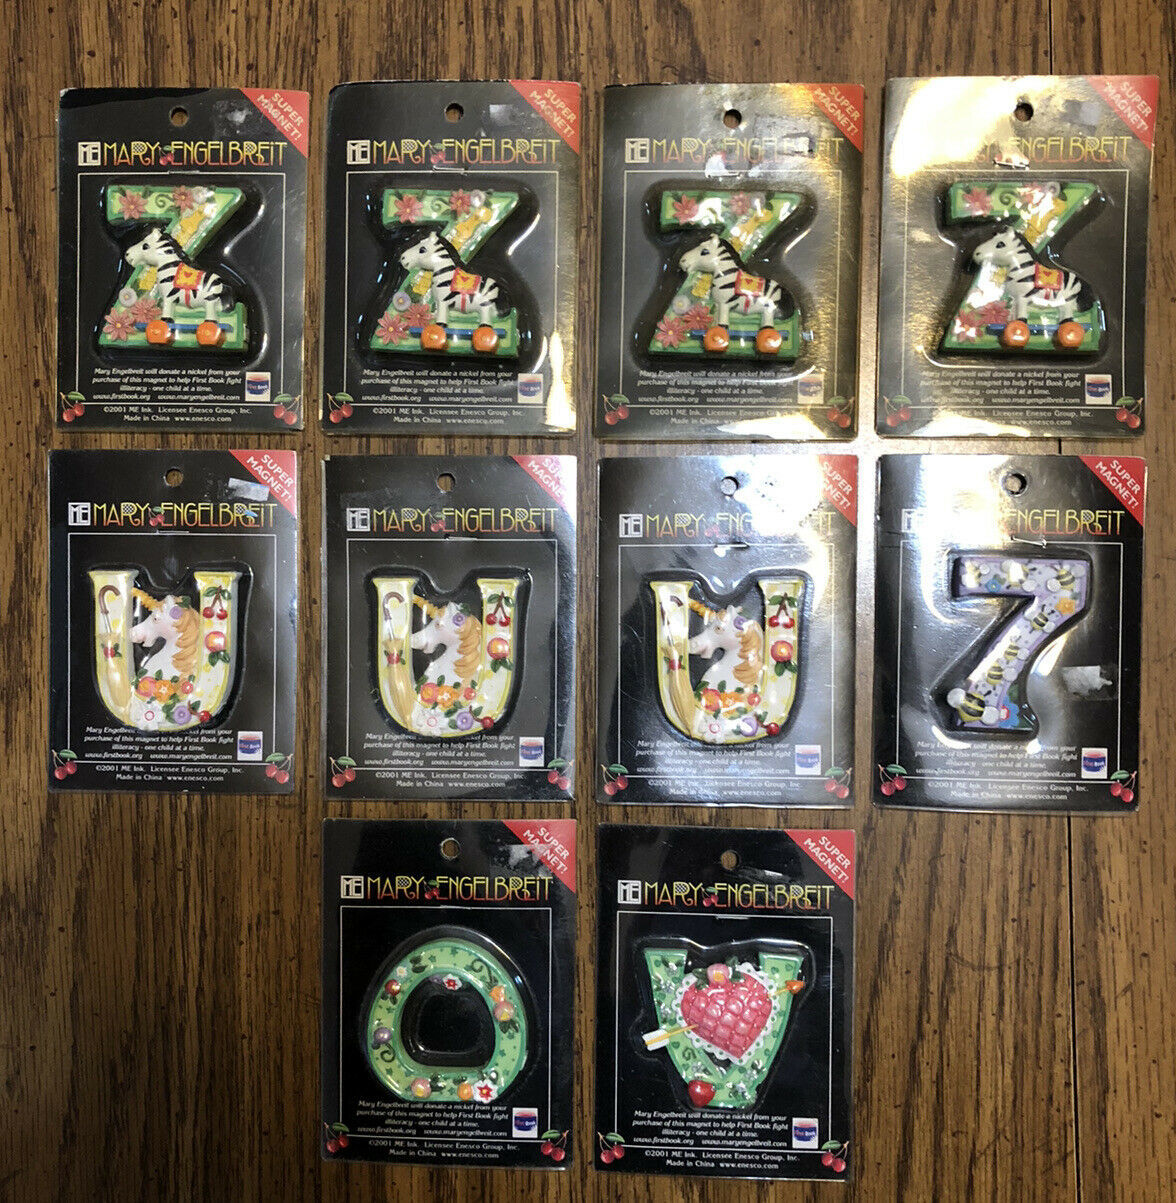 2001 MARY ENGELBREIT (Lot Of 10) Magnets 9-Letters/1-Number By Enesco New In Pkg - $37.99